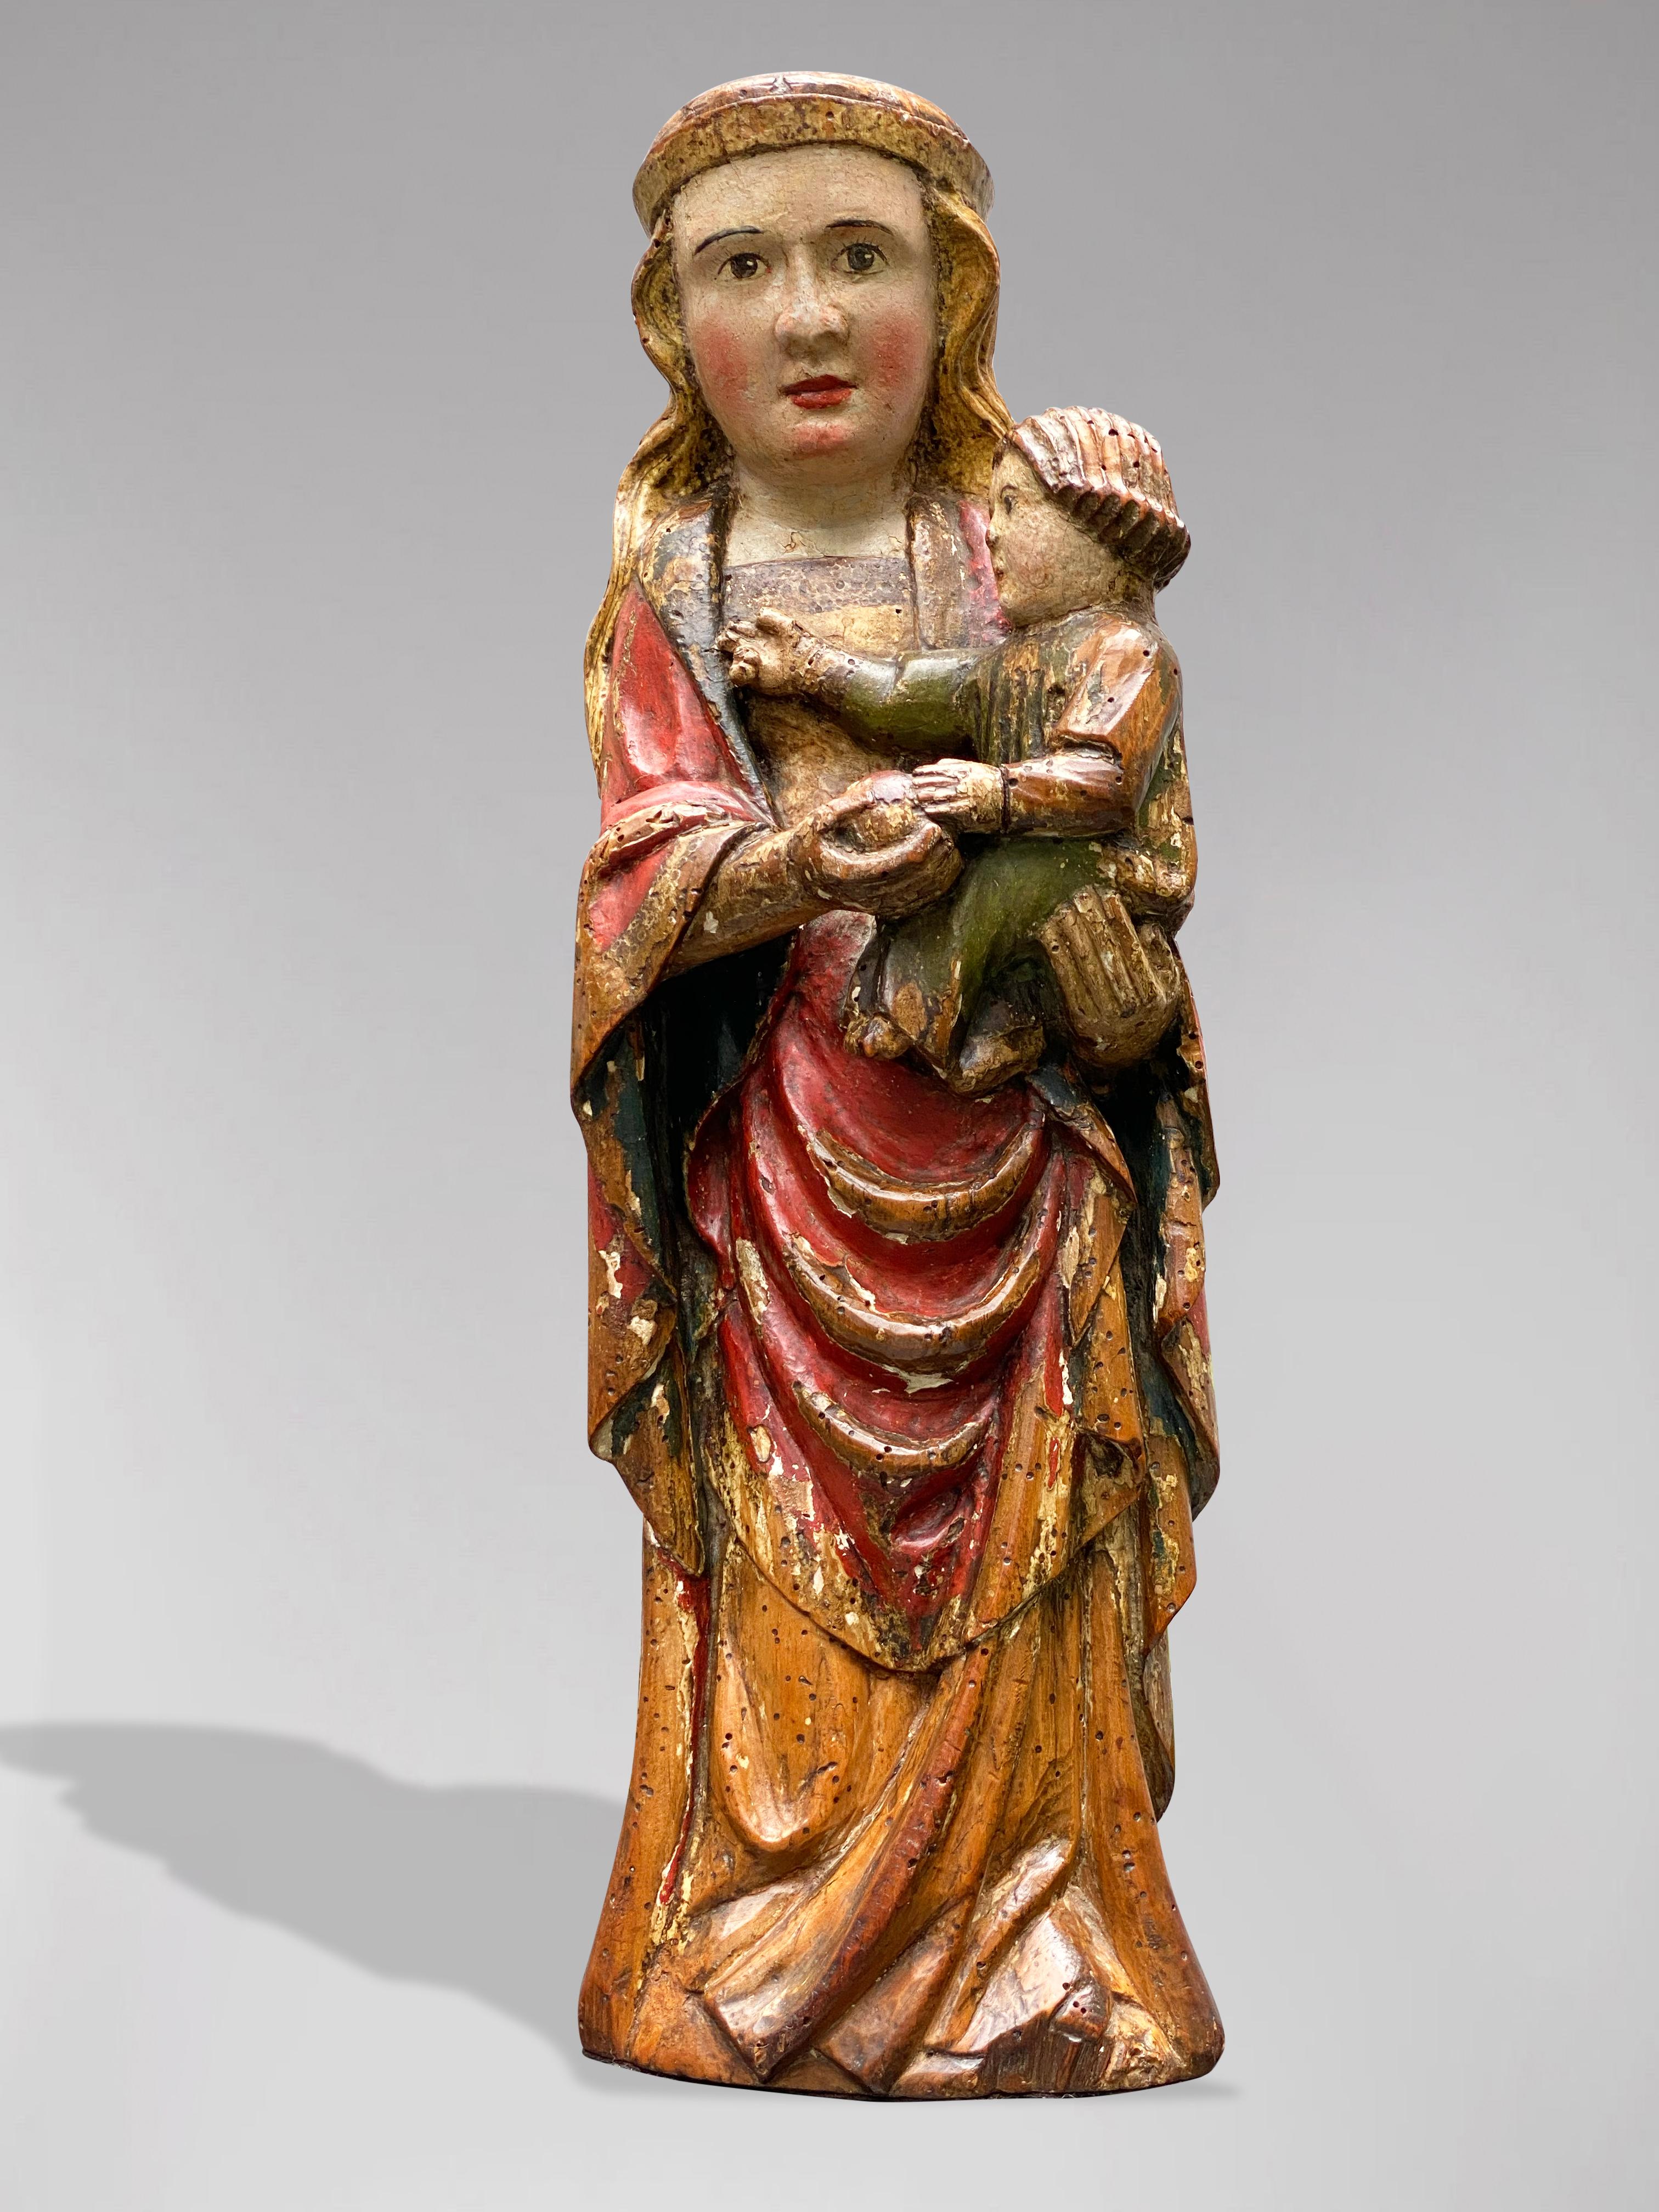 A Spanish Statue of the Virgin Mary with Child Jezus, circa 1600